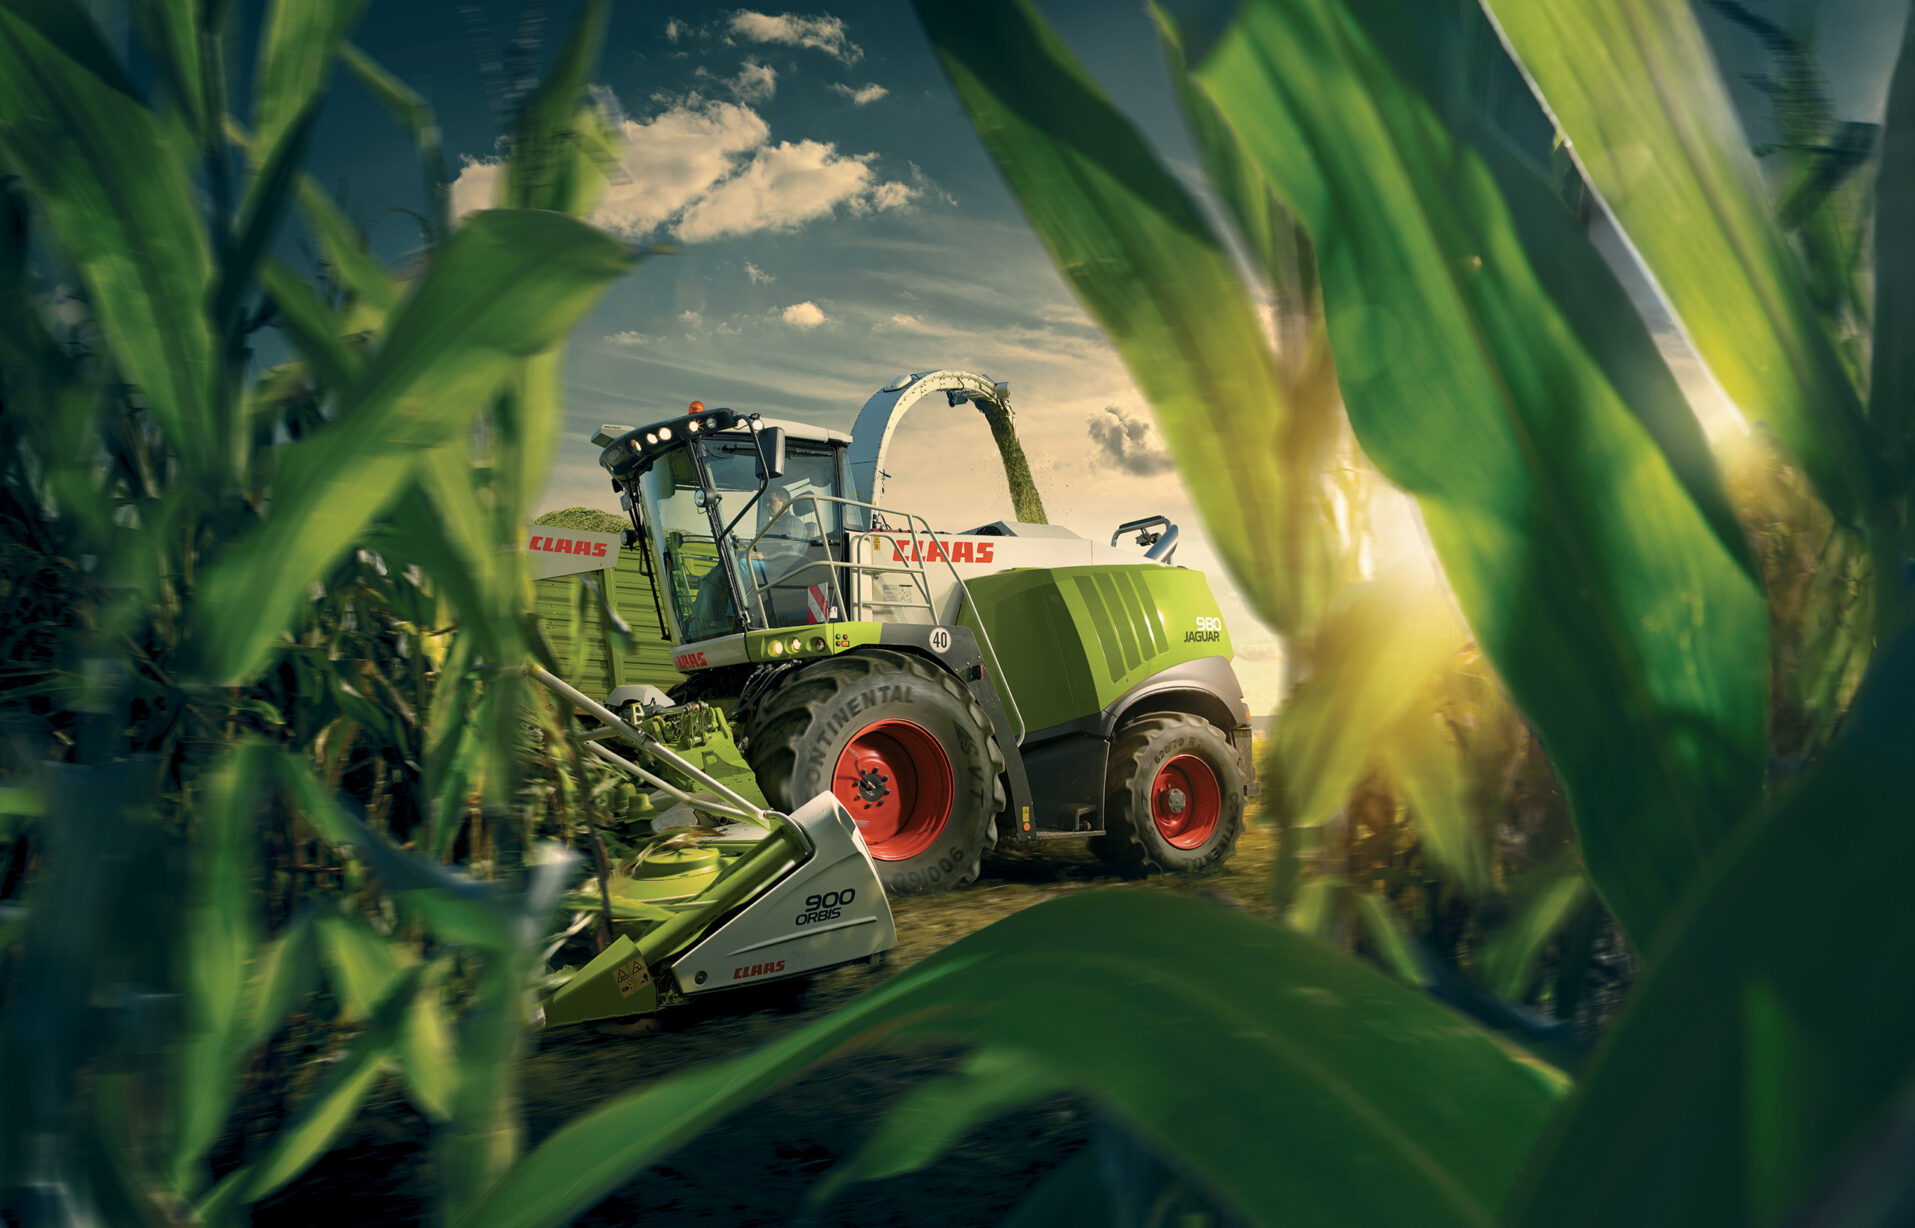 Beauty shot of CLAAS equipment working in a cornfield